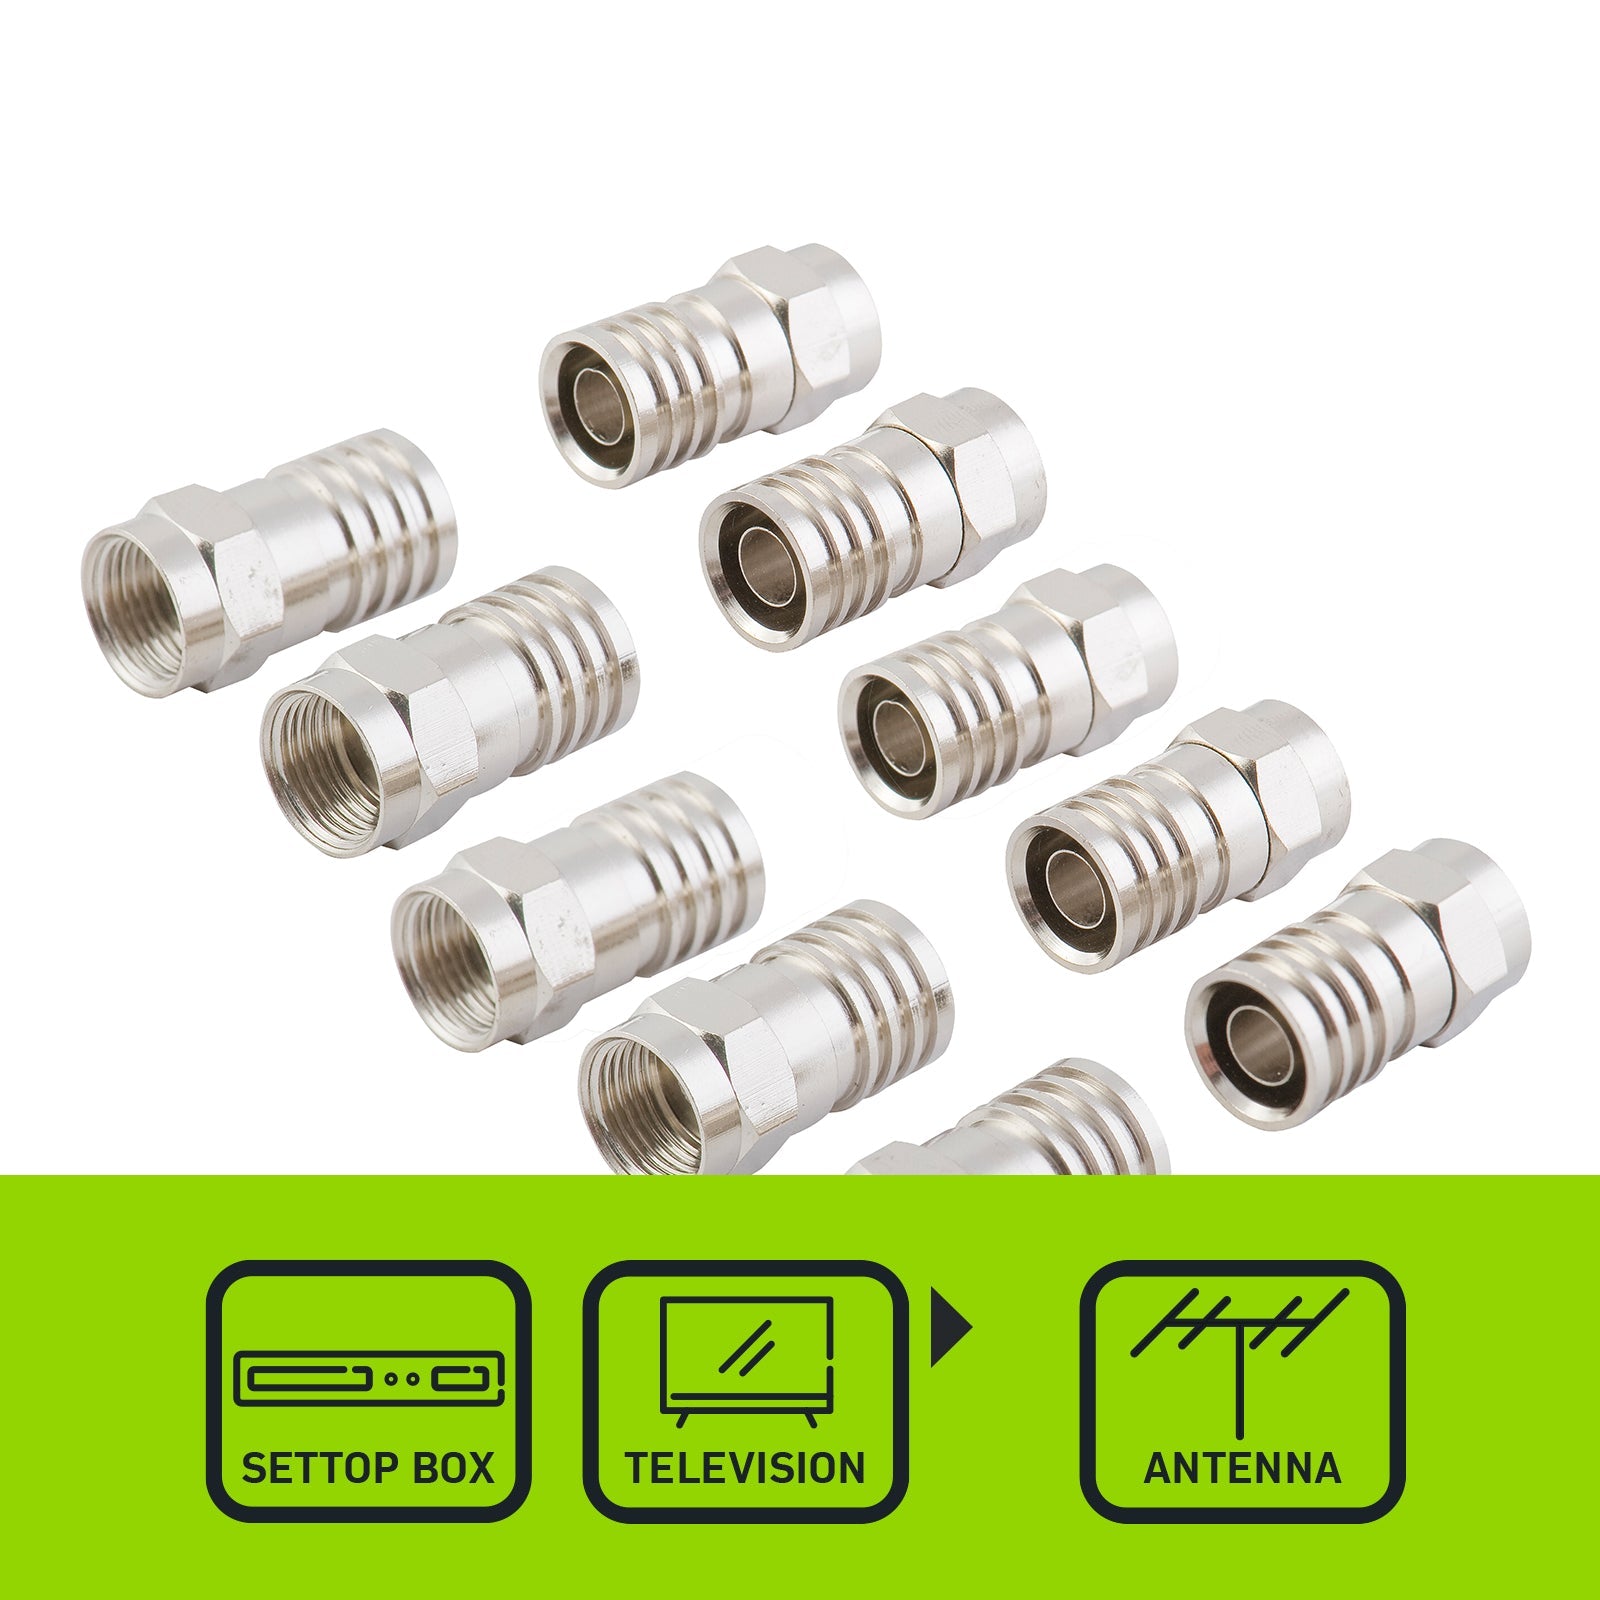 F59 Crimp Connector for RG6 Cable Heavy Gauge - 10 Pack